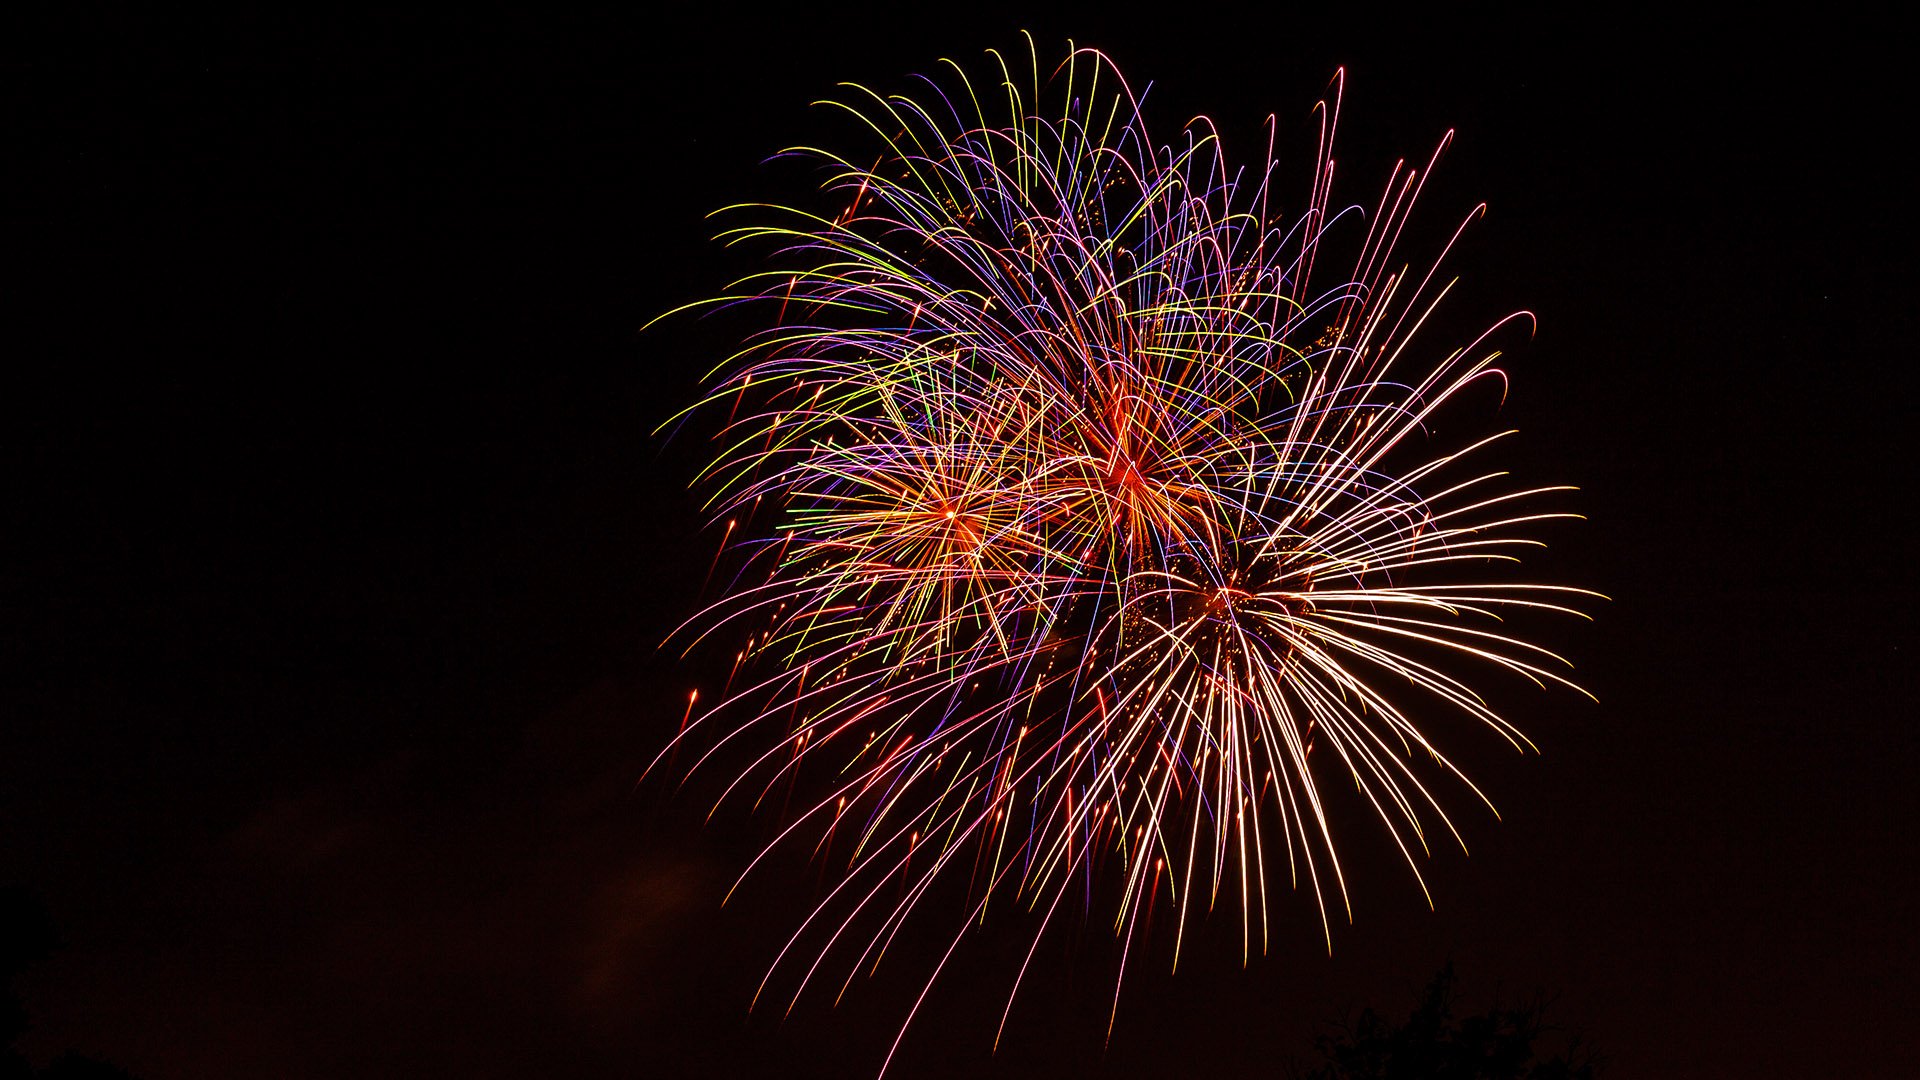 Quick Tip: Use a Black Card While Photographing Fireworks